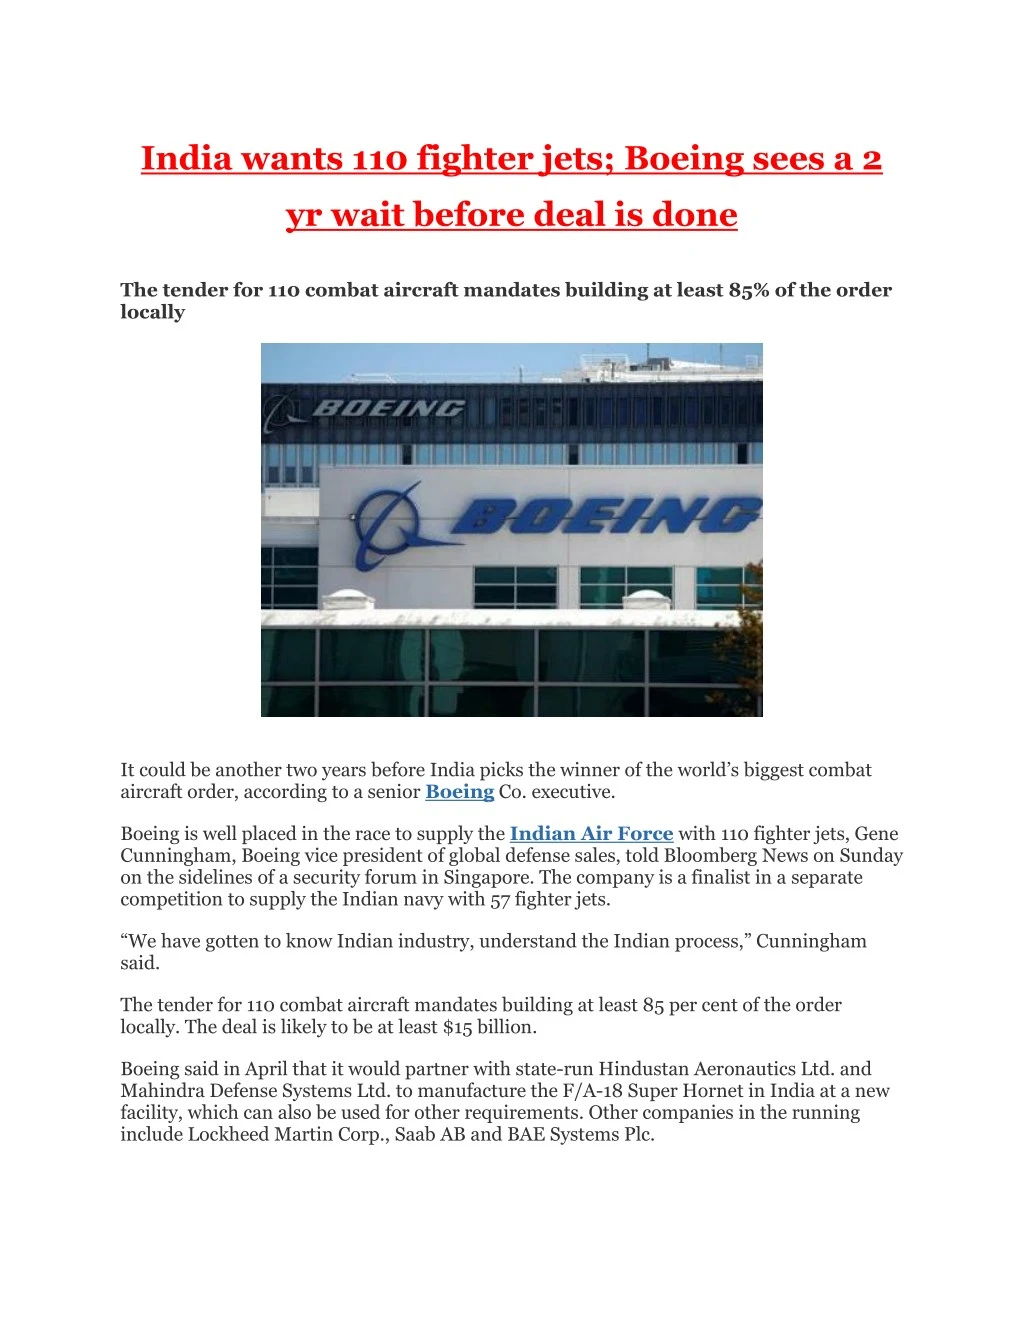 india wants 110 fighter jets boeing sees a 2